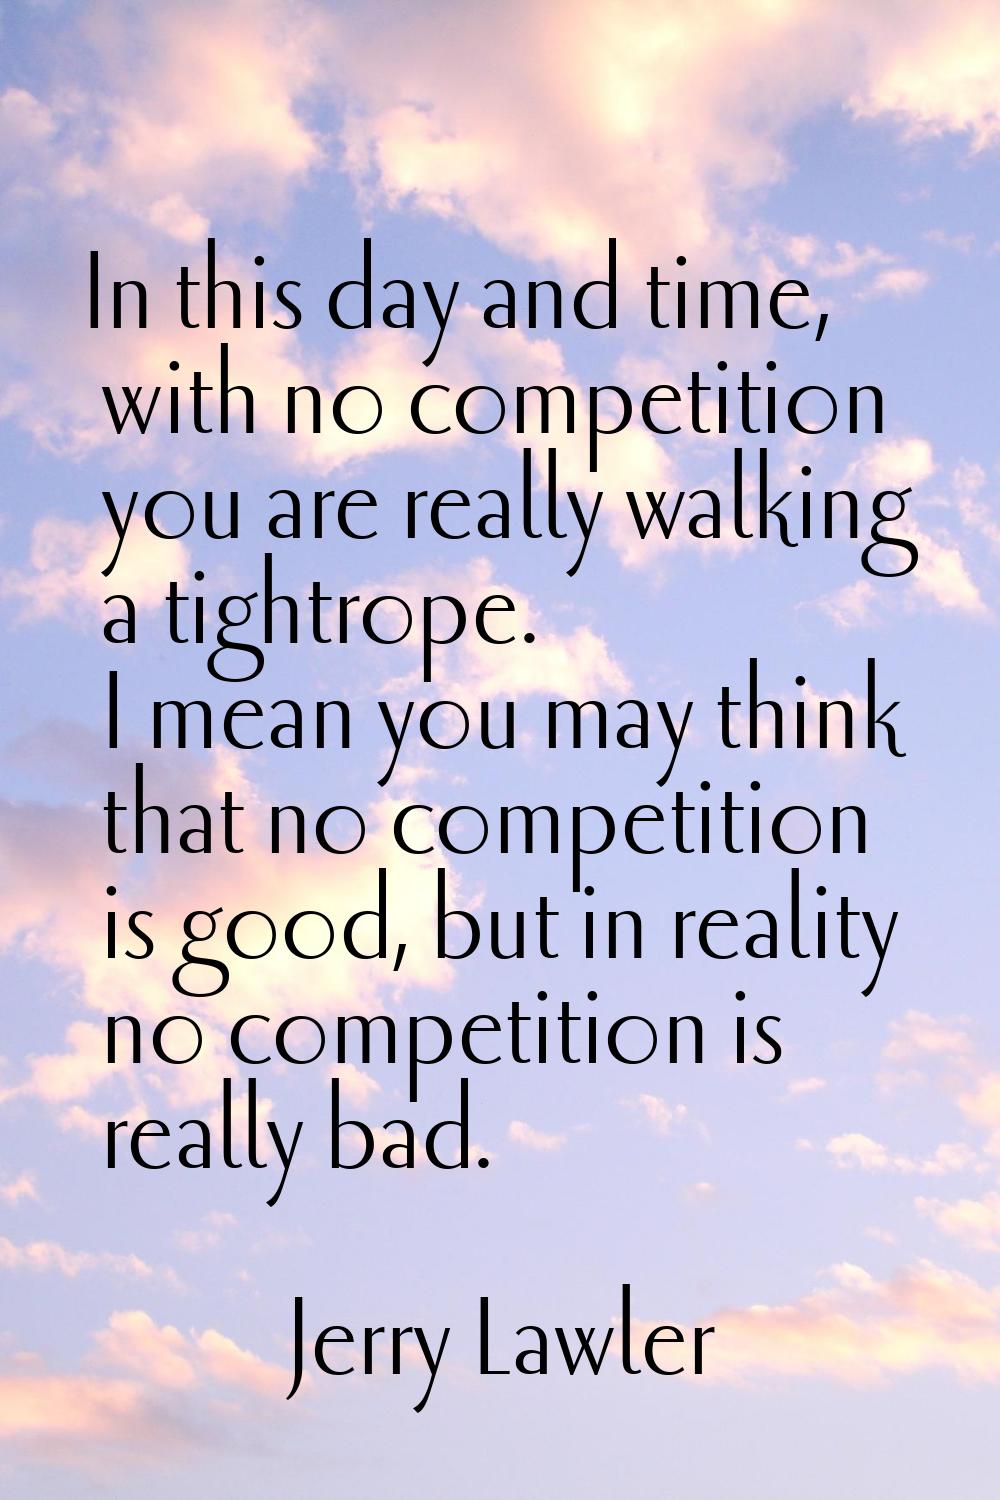 In this day and time, with no competition you are really walking a tightrope. I mean you may think 